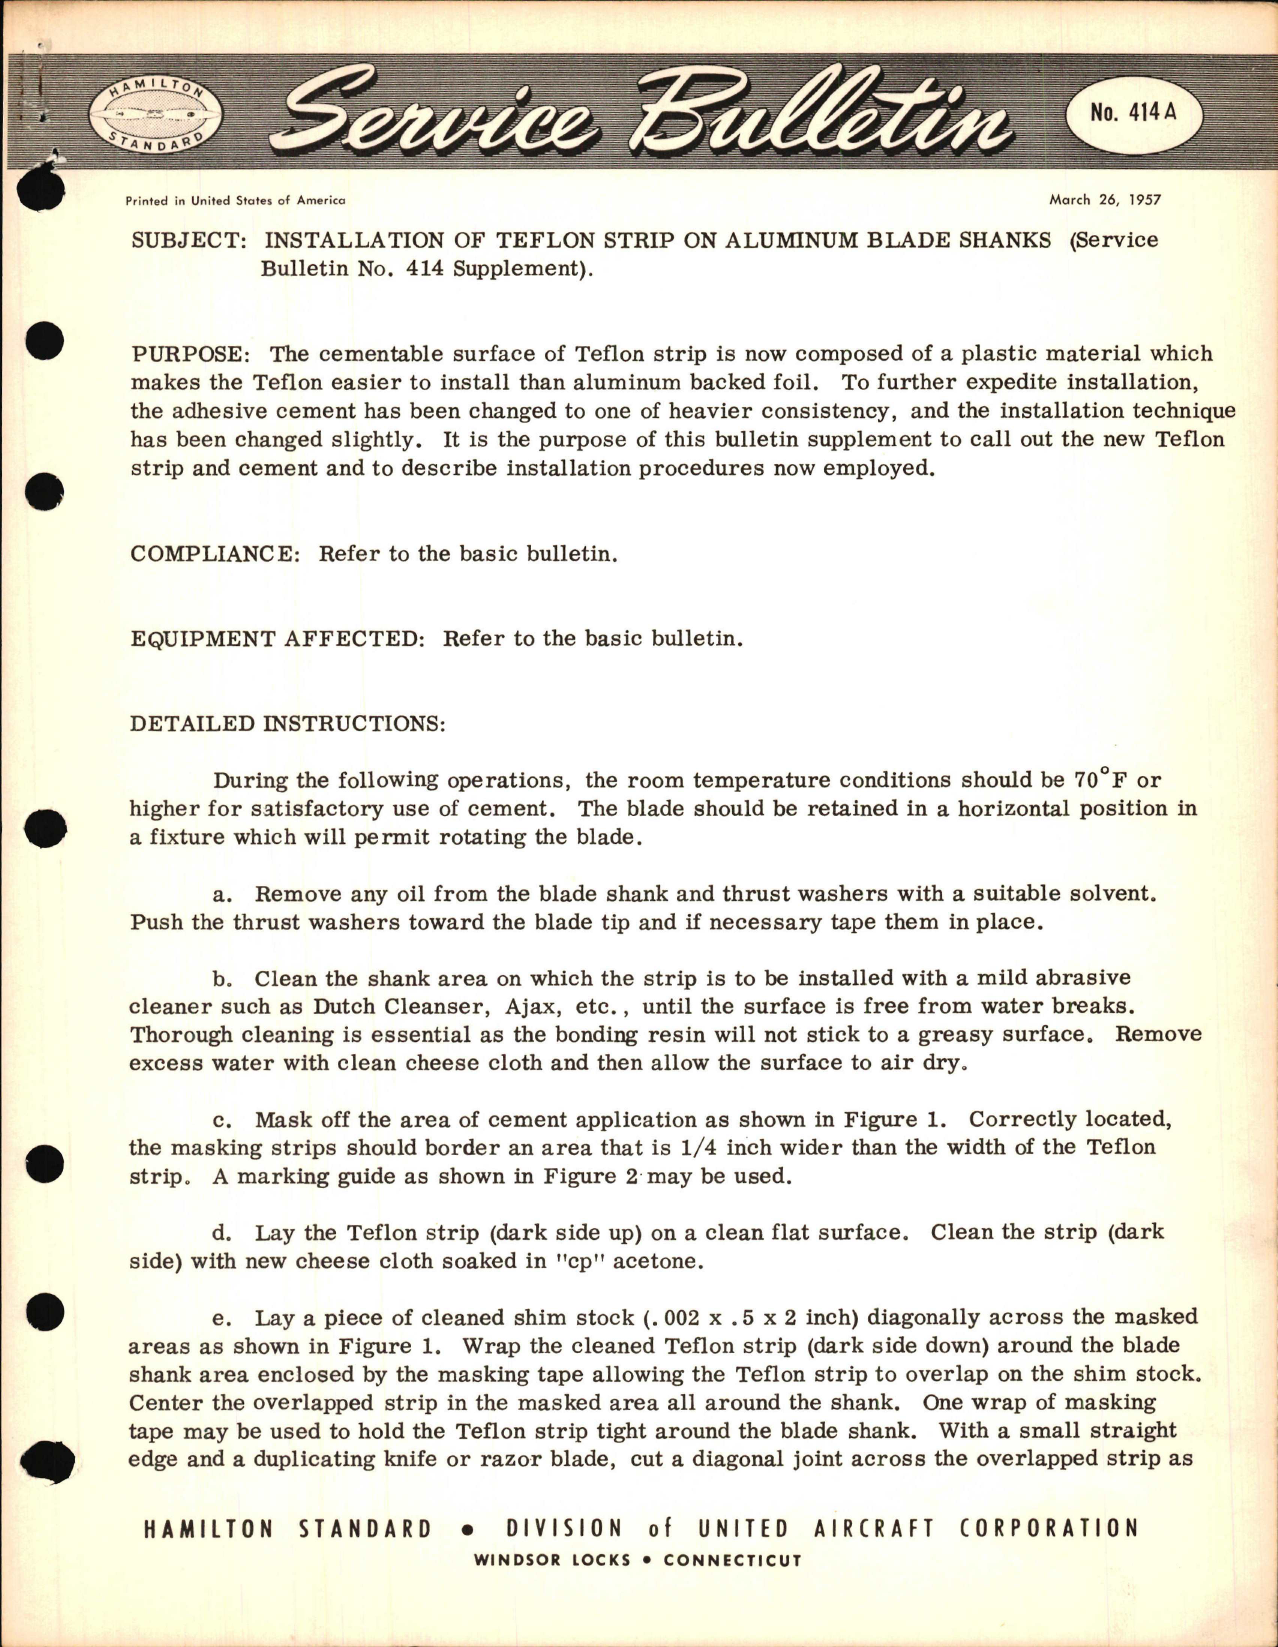 Sample page 1 from AirCorps Library document: Installation of Teflon Foil on Aluminum Blade Shanks